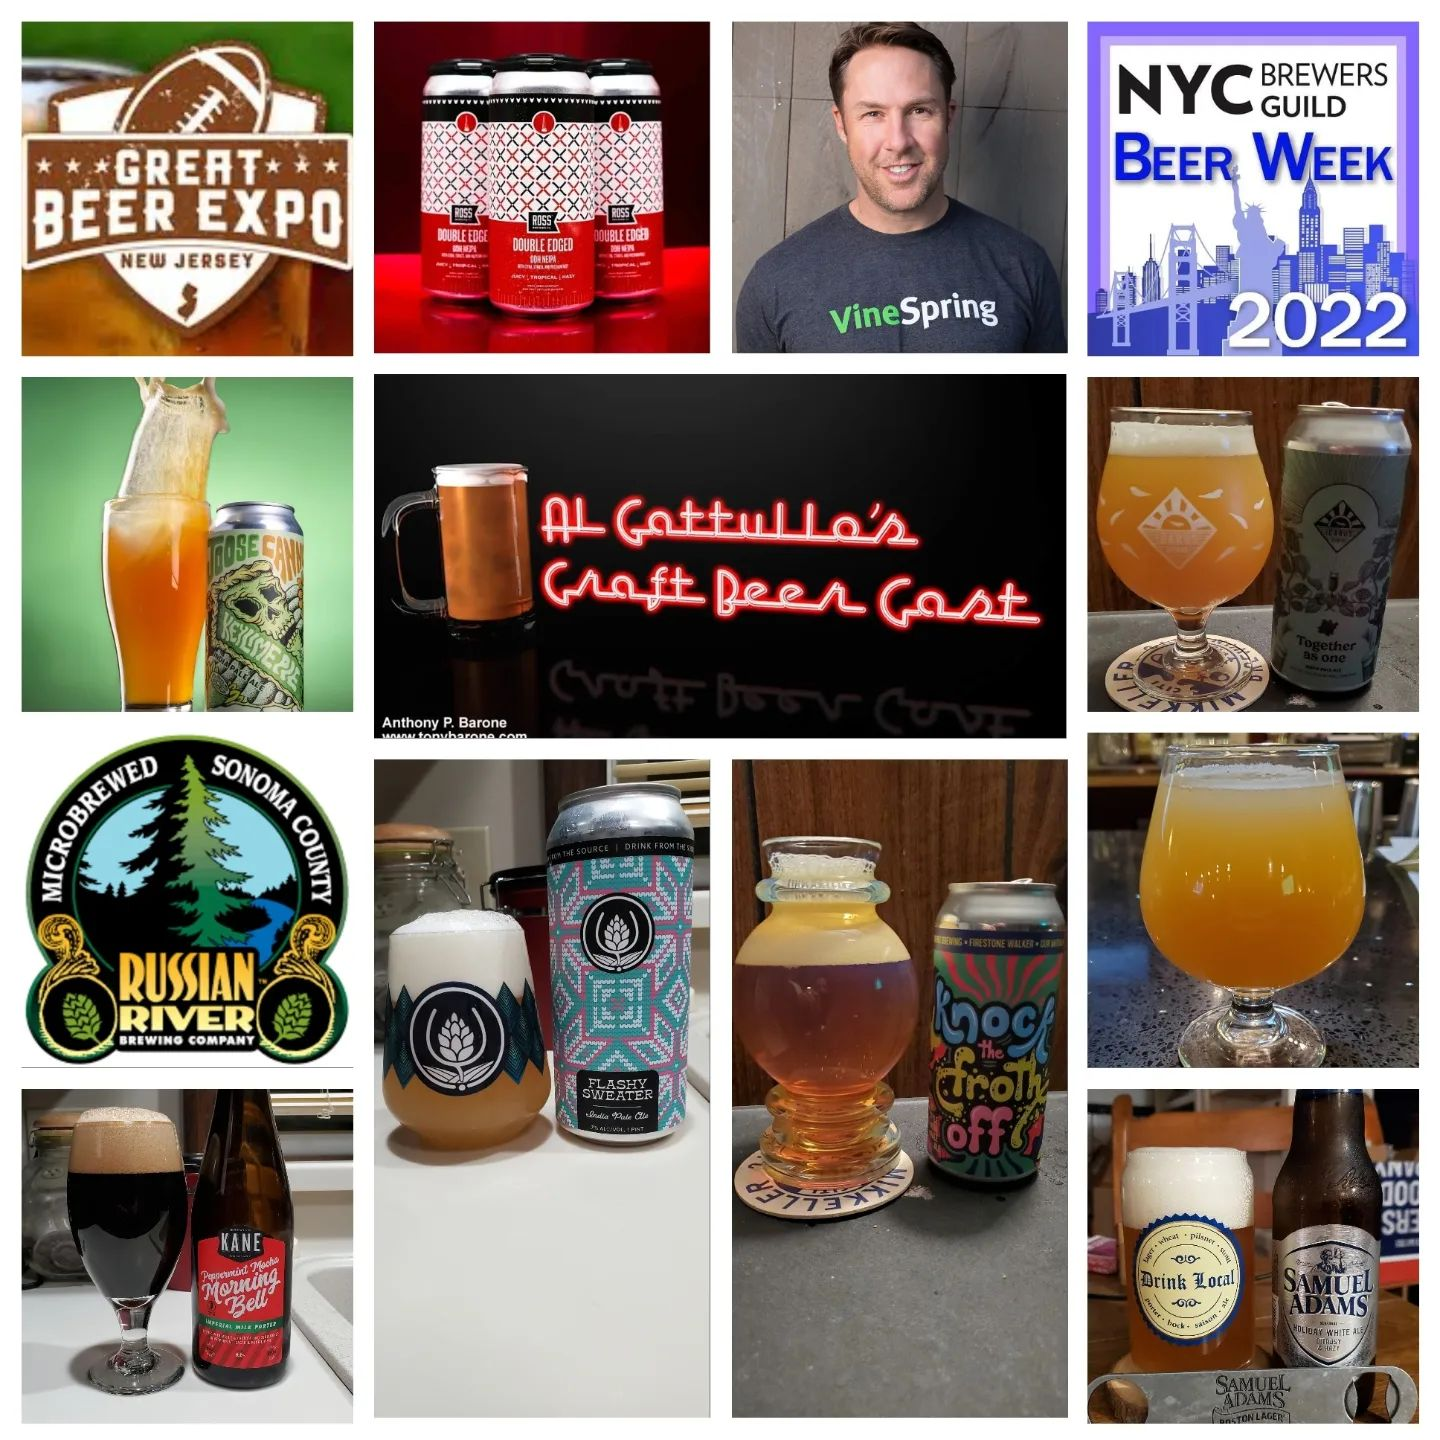 AG Craft Beer Cast1-23-22 Vinespring CEO Chris Towt